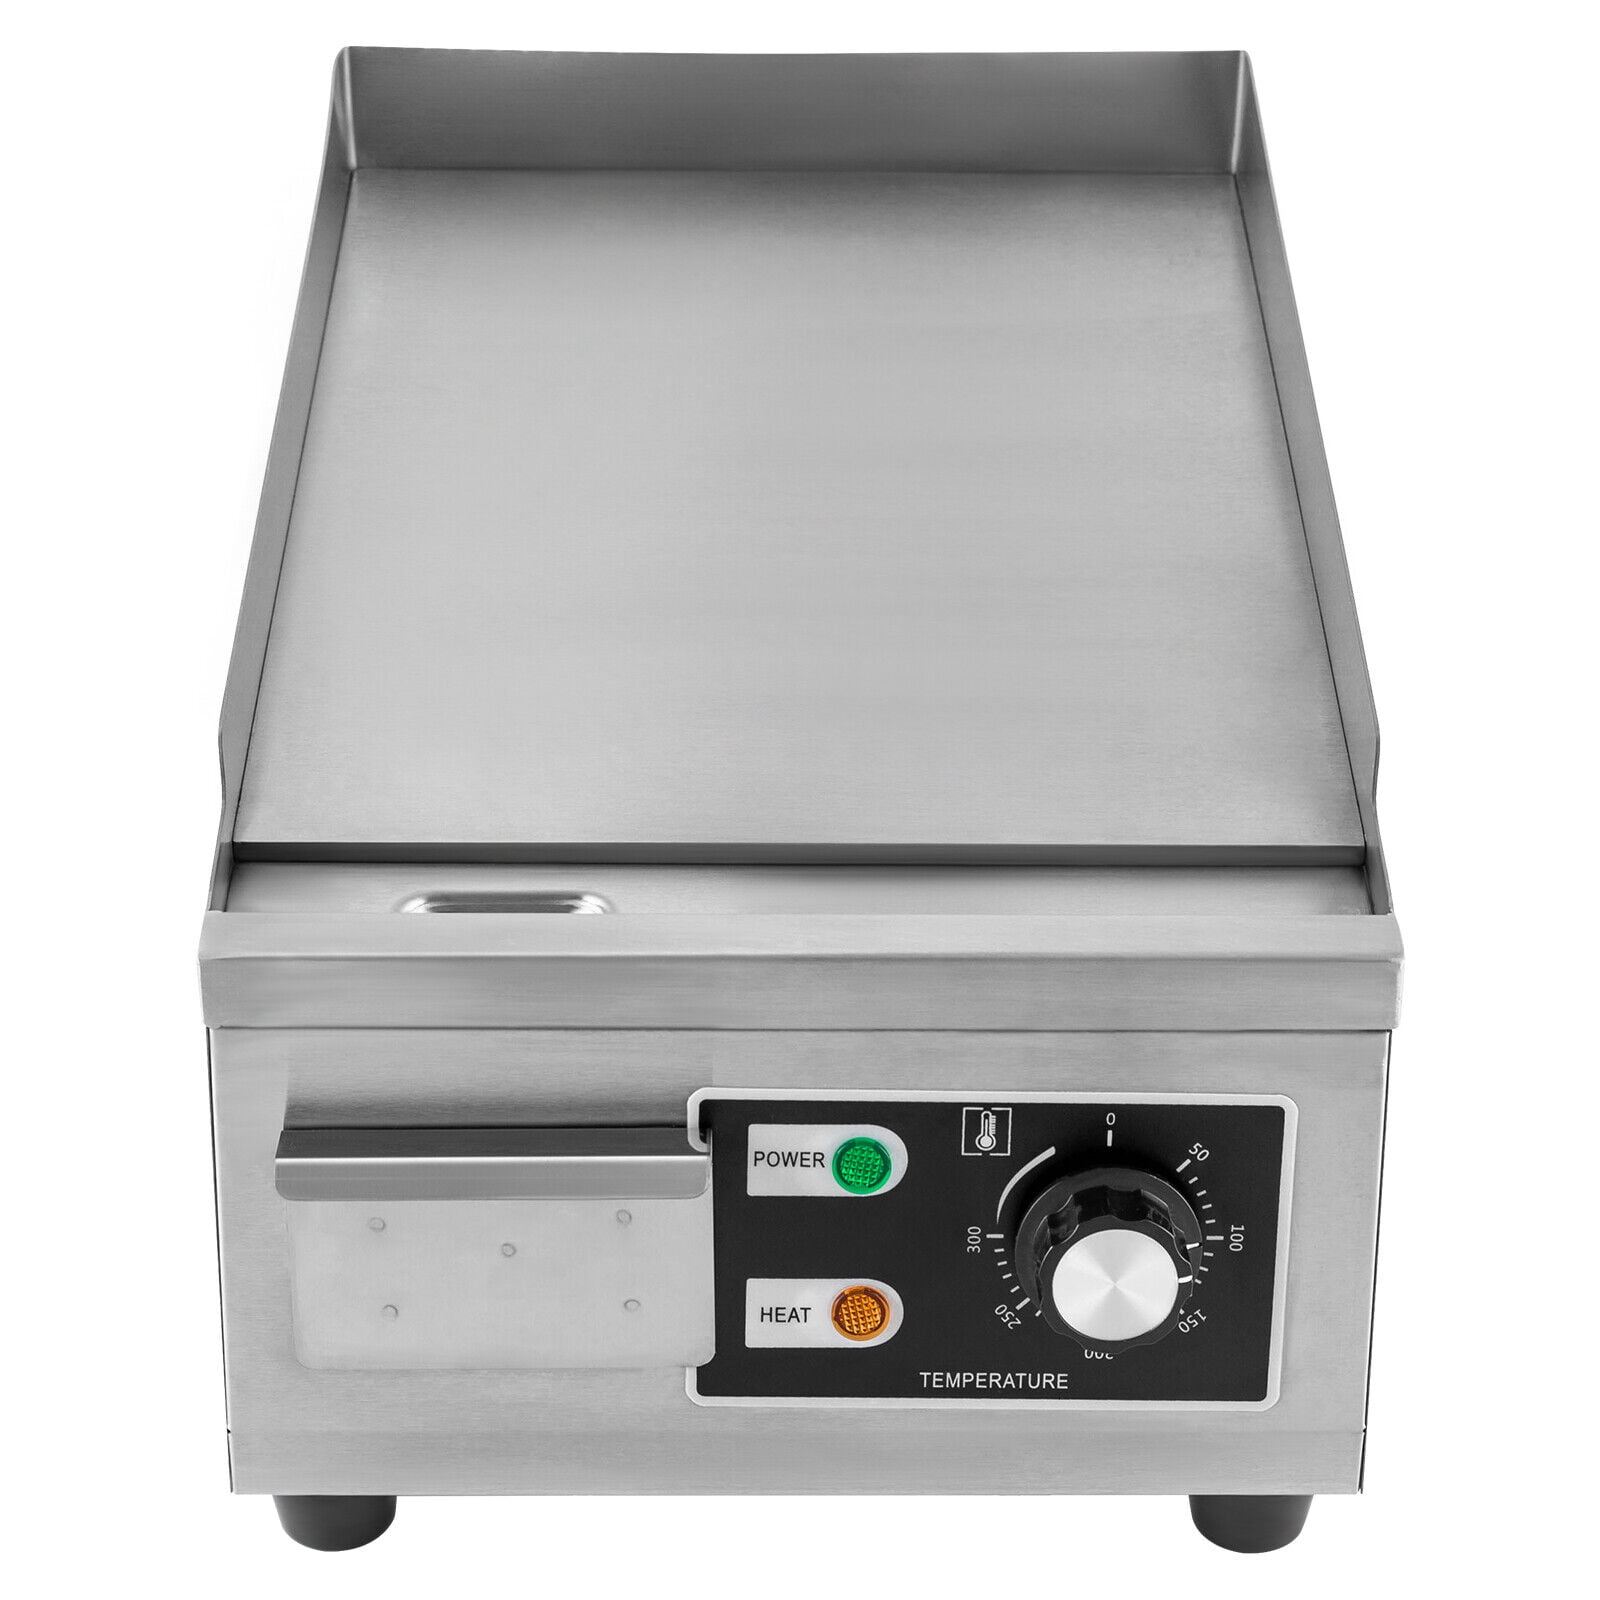 KOTEK Commercial Electric Griddle, 2000W 22” Flat Top Griddle, Stainless Steel Frame & Drip Tray, Adjustable Temperature Control 122°F-572°F